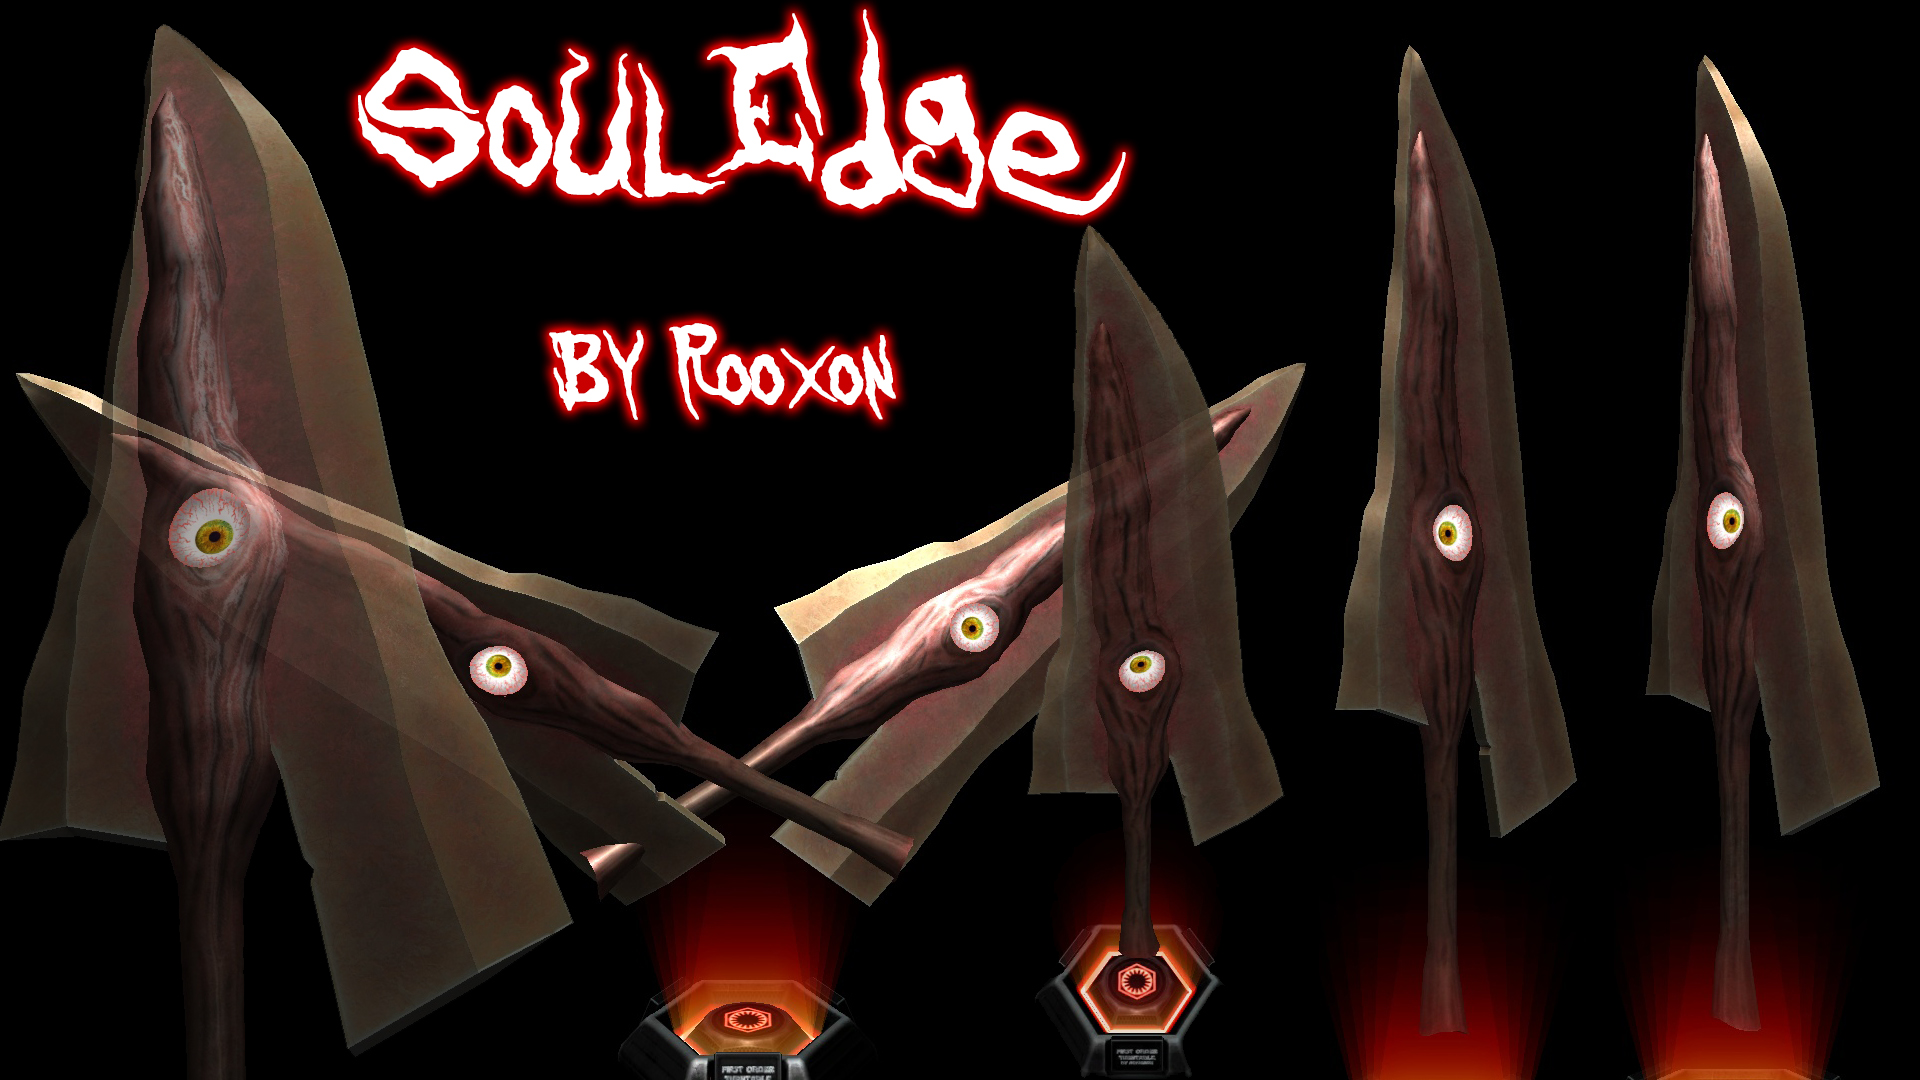 More information about "Soul Edge, The Devouring Blade"